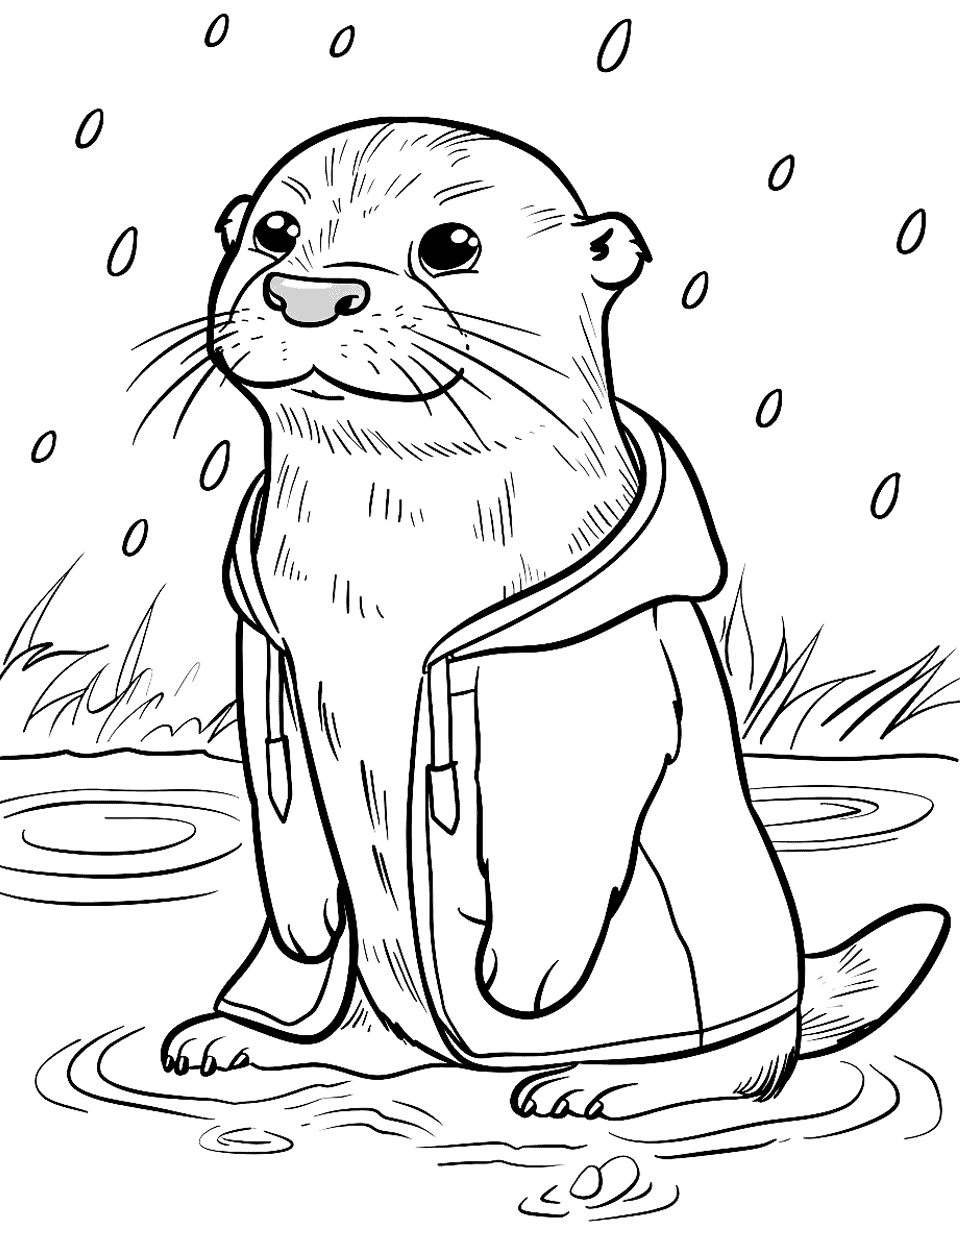 Otter in a Raincoat Coloring Page - An otter wearing a raincoat, splashing in puddles during a rain.